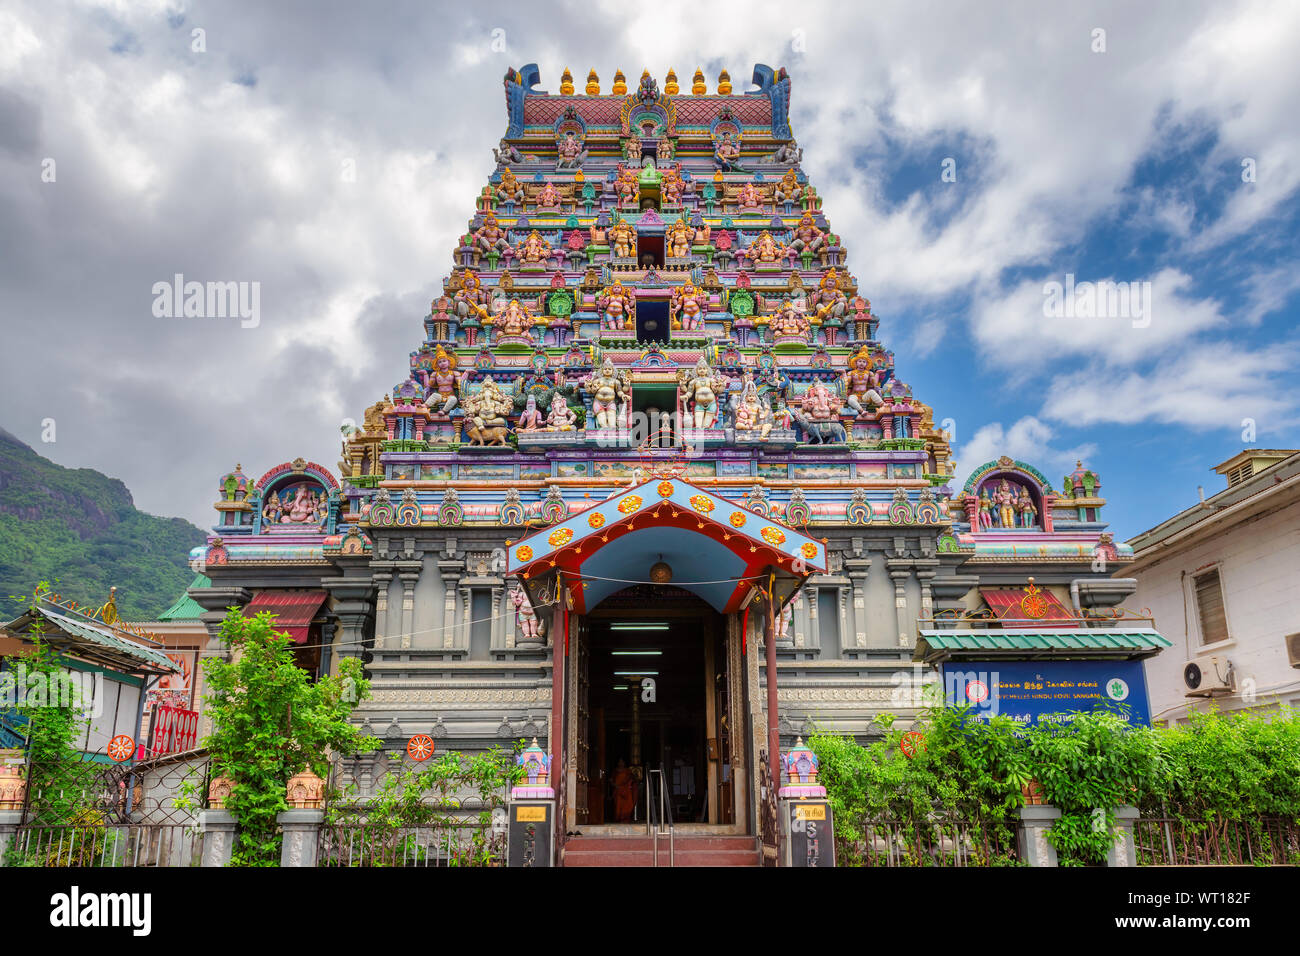 Colorful facade of a Hindu temple in Victoria, Mahe, Seychelles Stock Photo